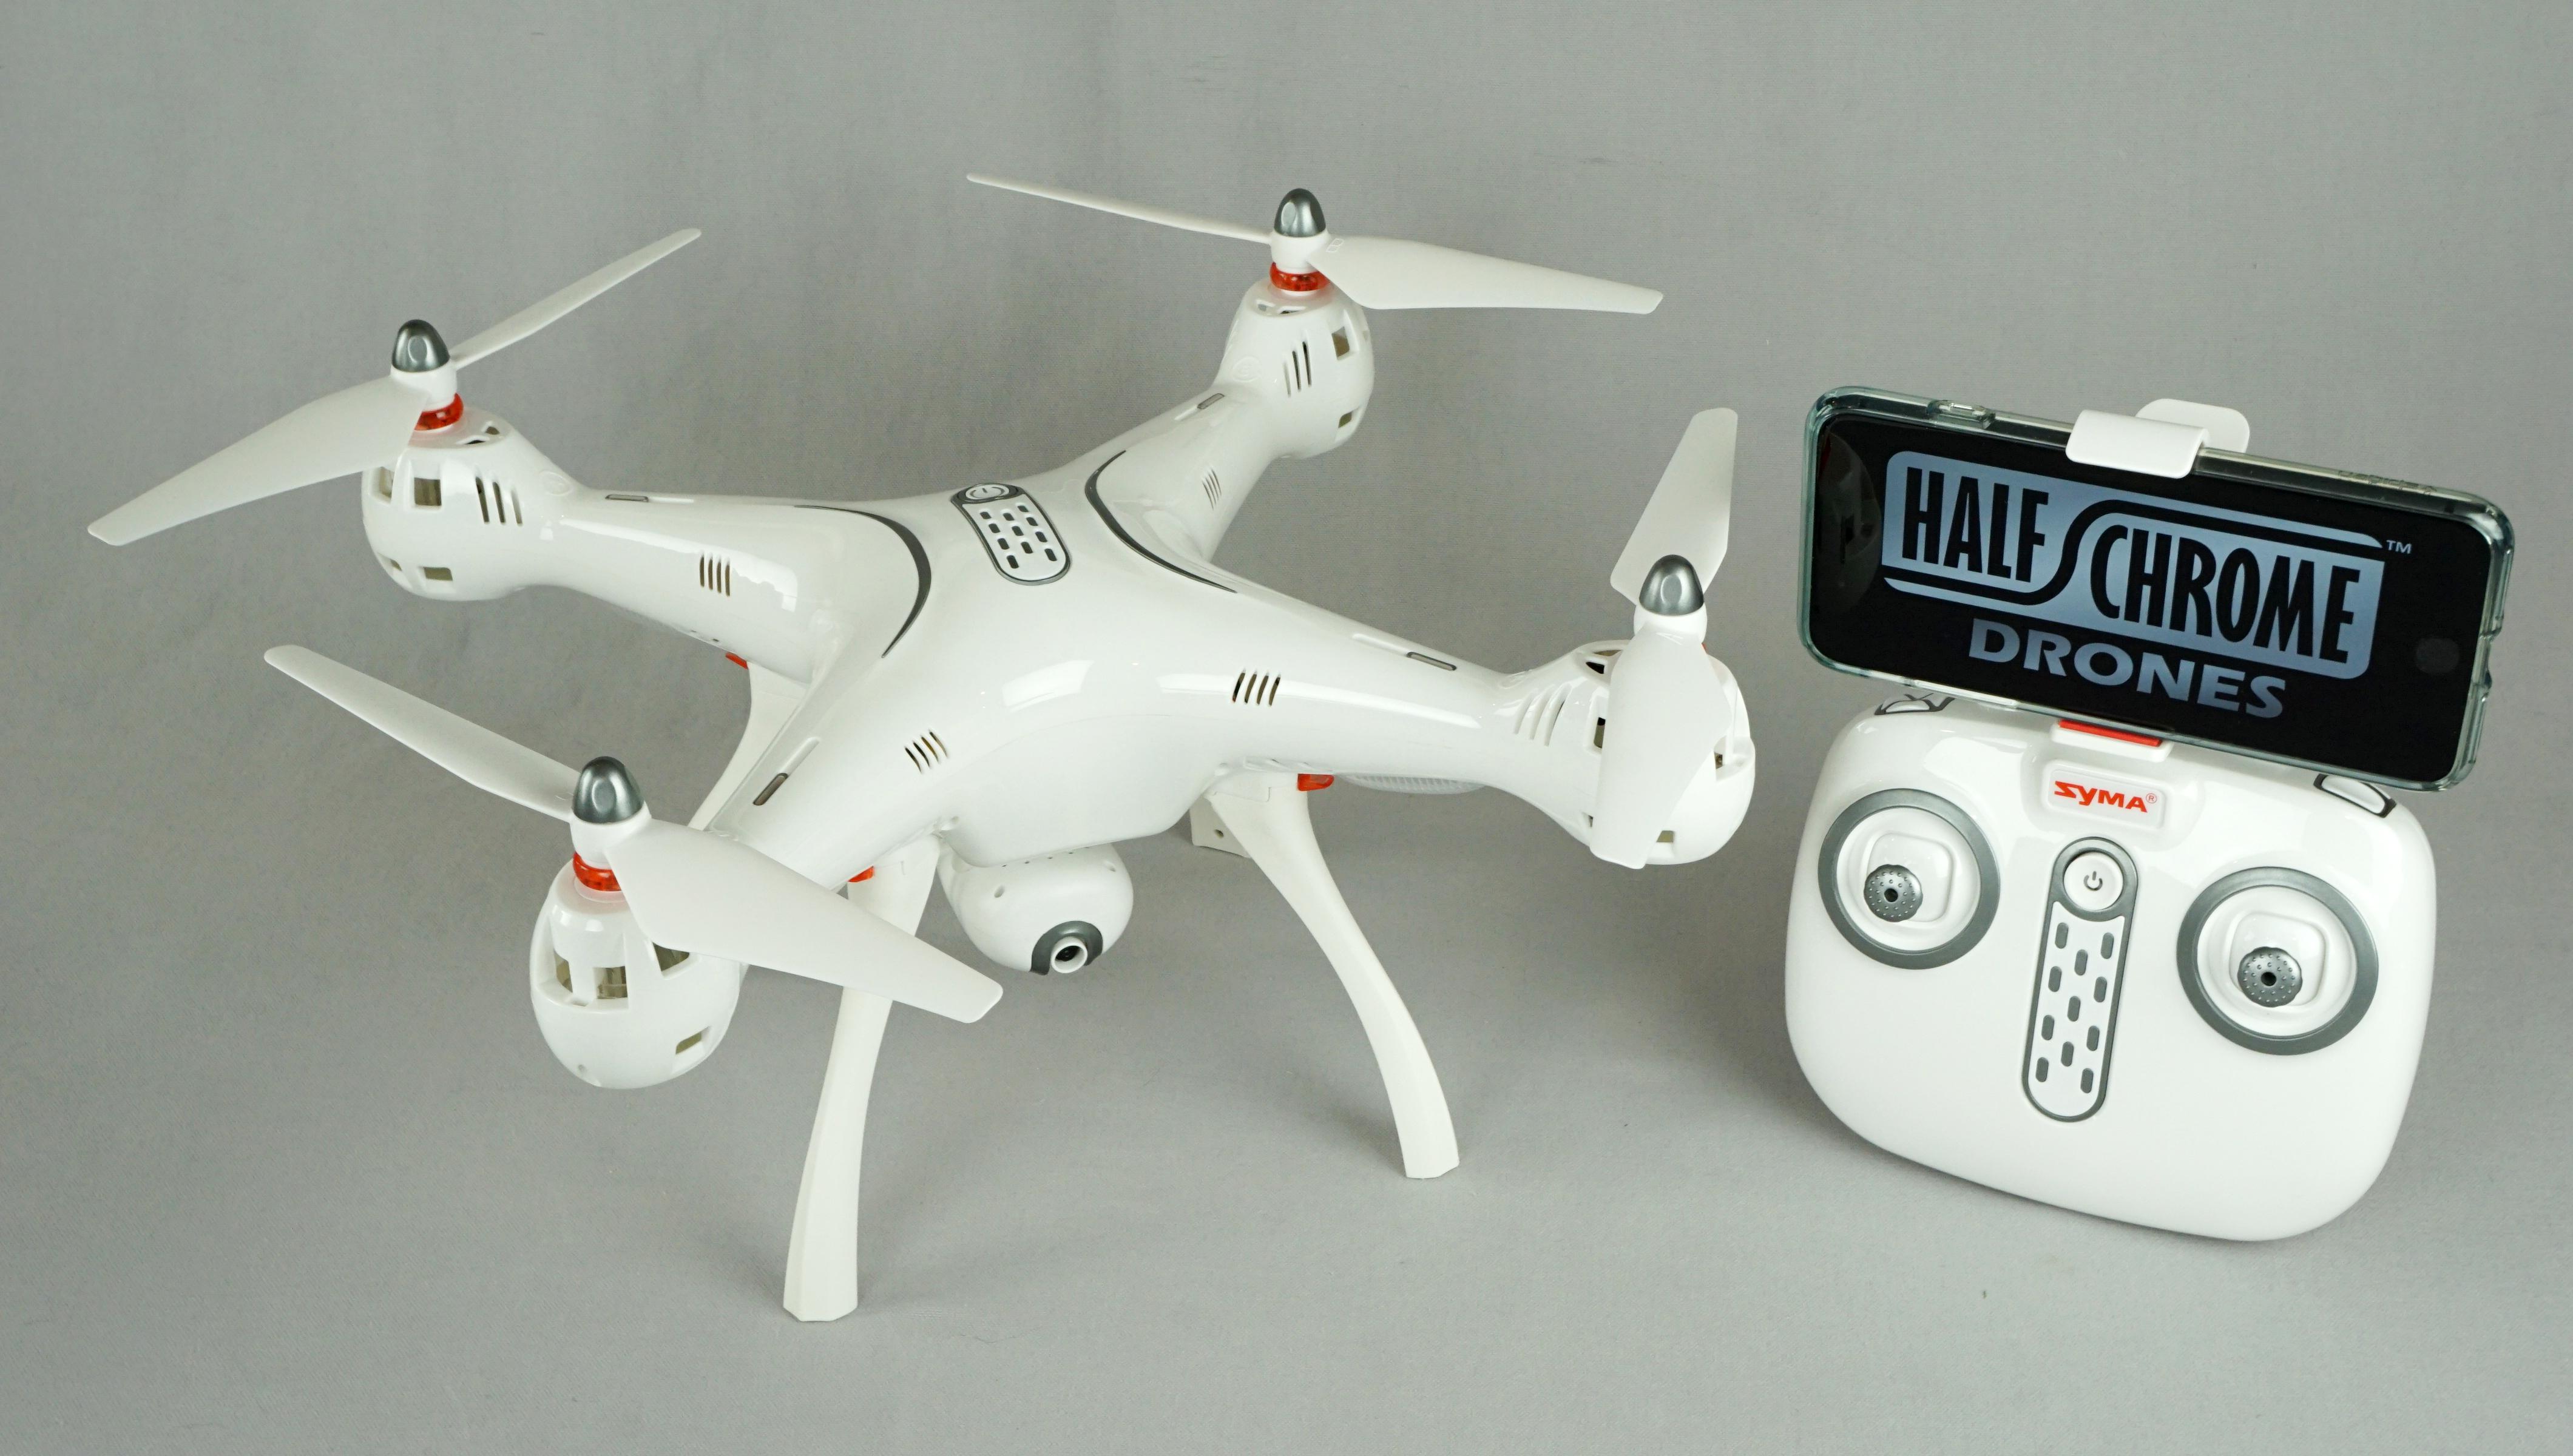 Unconscious downstairs copper Syma X8 Pro: Affordable Drone with GPS and an HD Camera